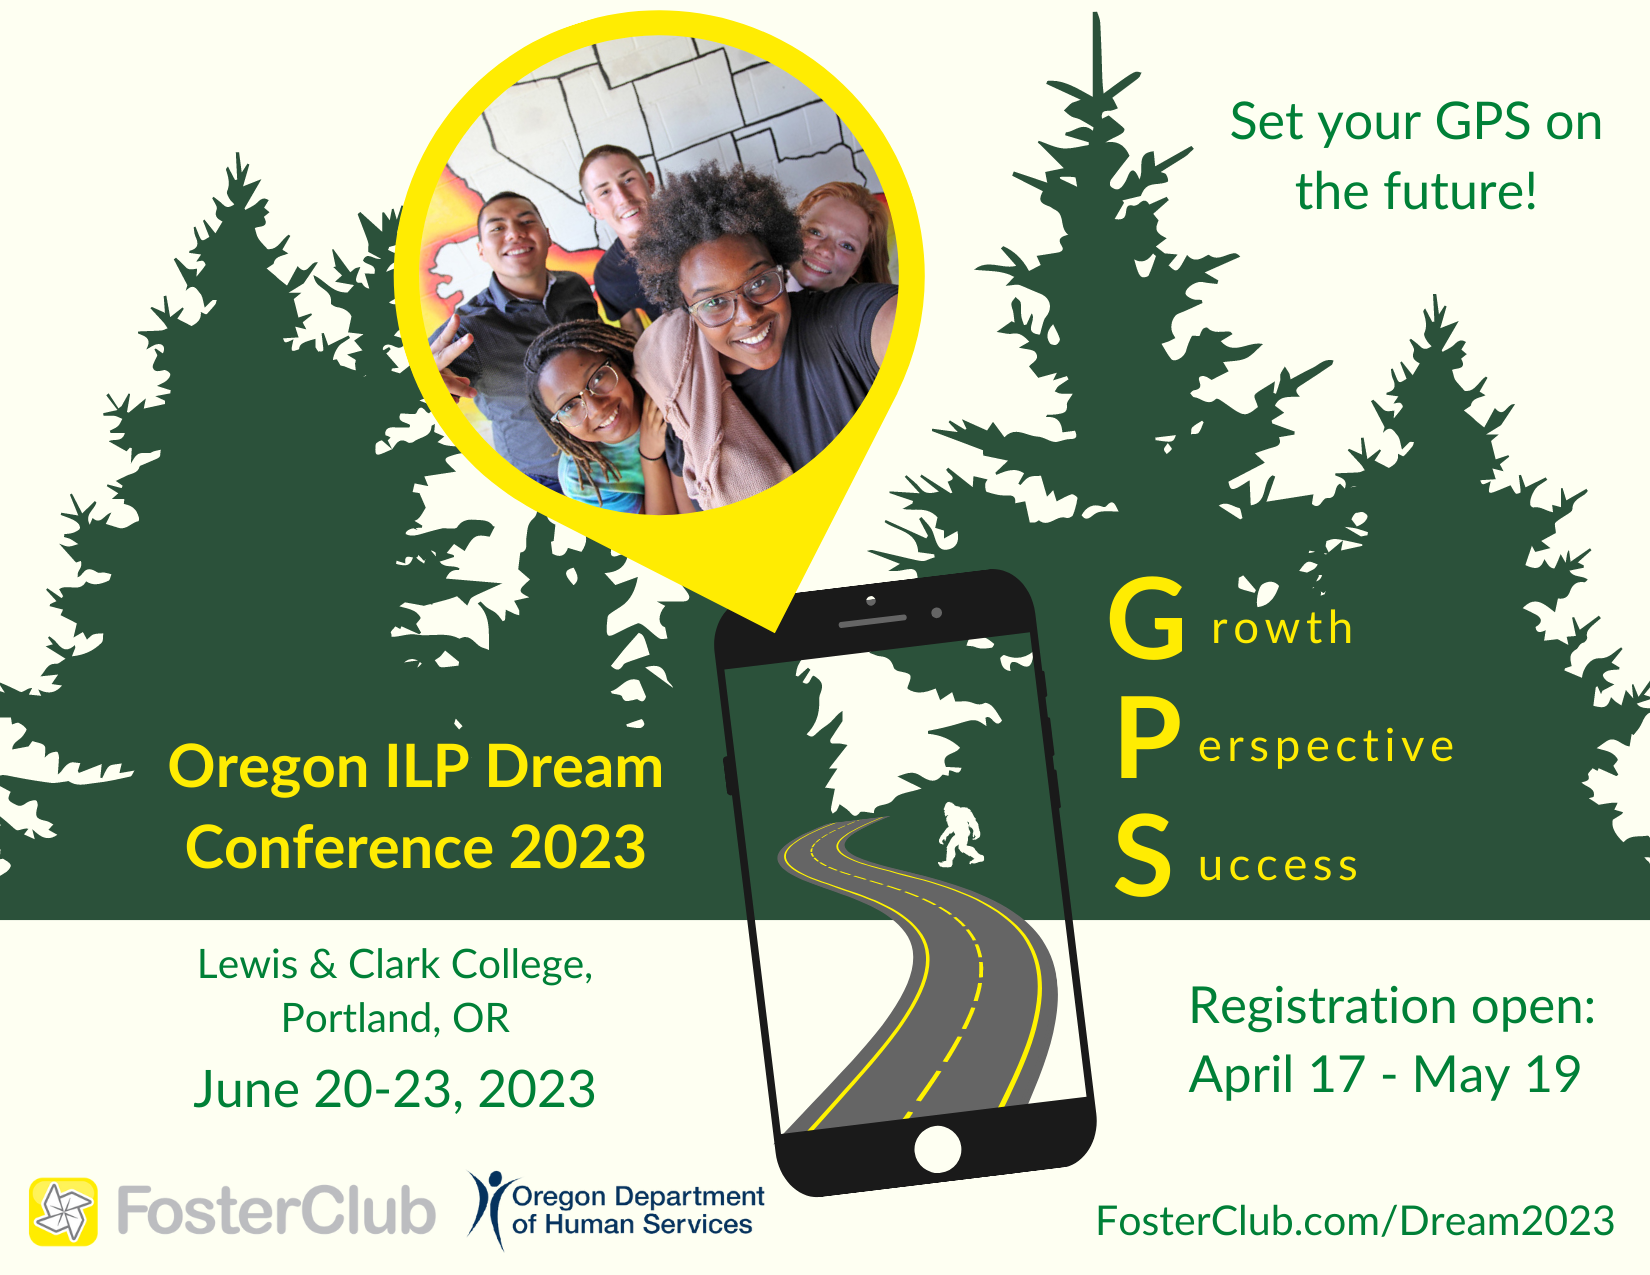 Oregon Dream 2023 Save the Date - June 20-23, 2023 - Registration open April 17 - May 19